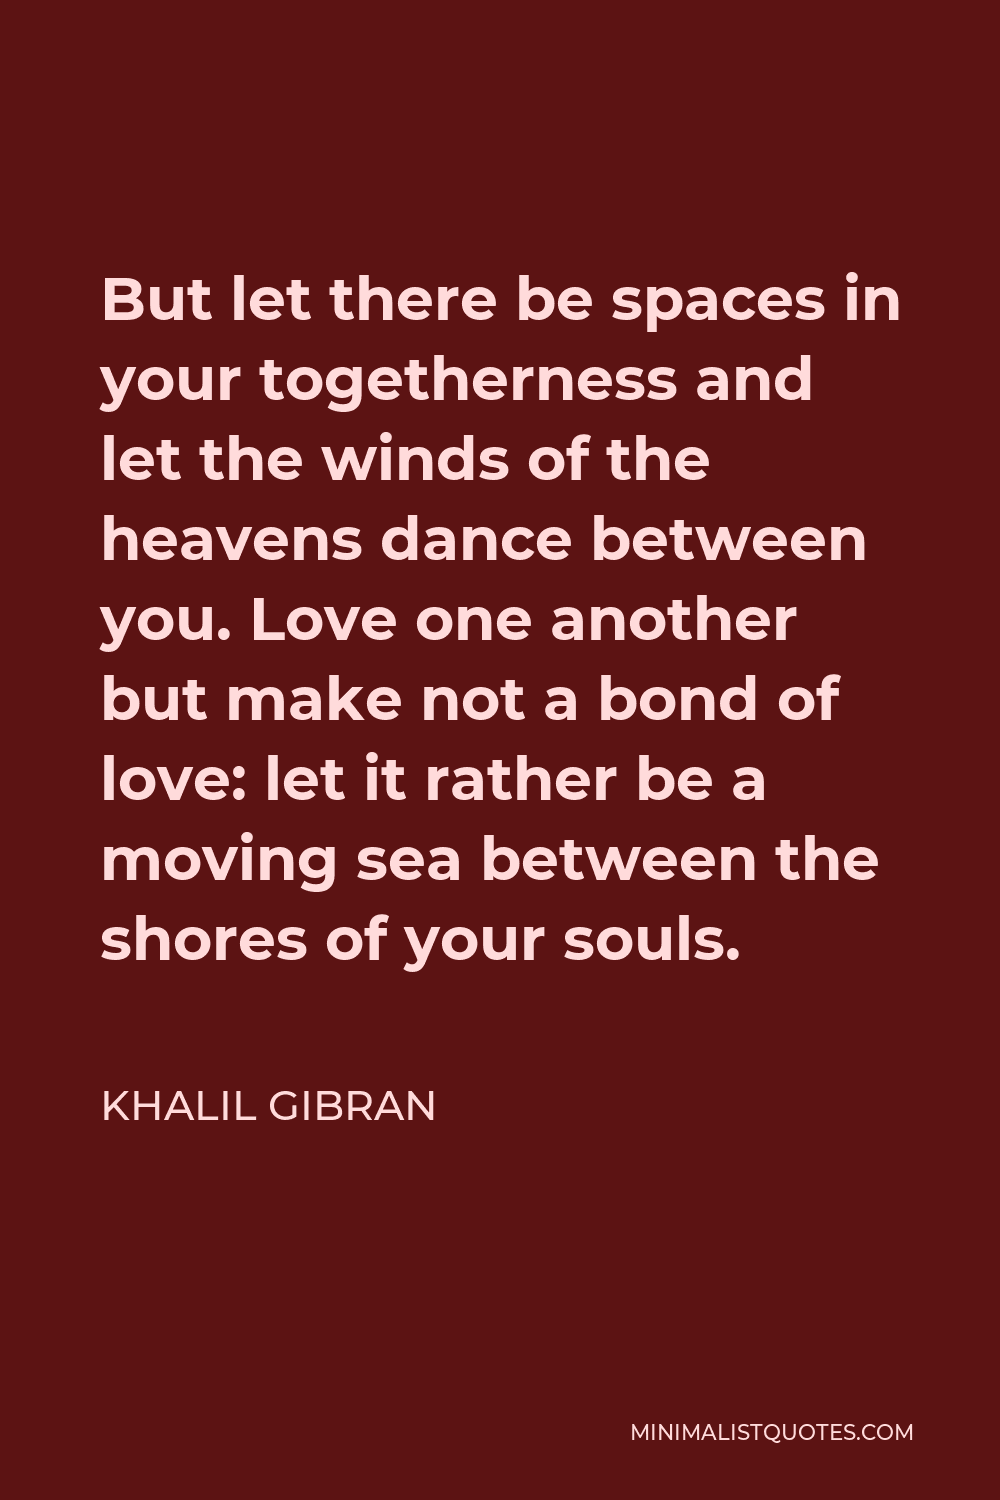 Khalil Gibran Quote - But let there be spaces in your togetherness and let the winds of the heavens dance between you. Love one another but make not a bond of love: let it rather be a moving sea between the shores of your souls.